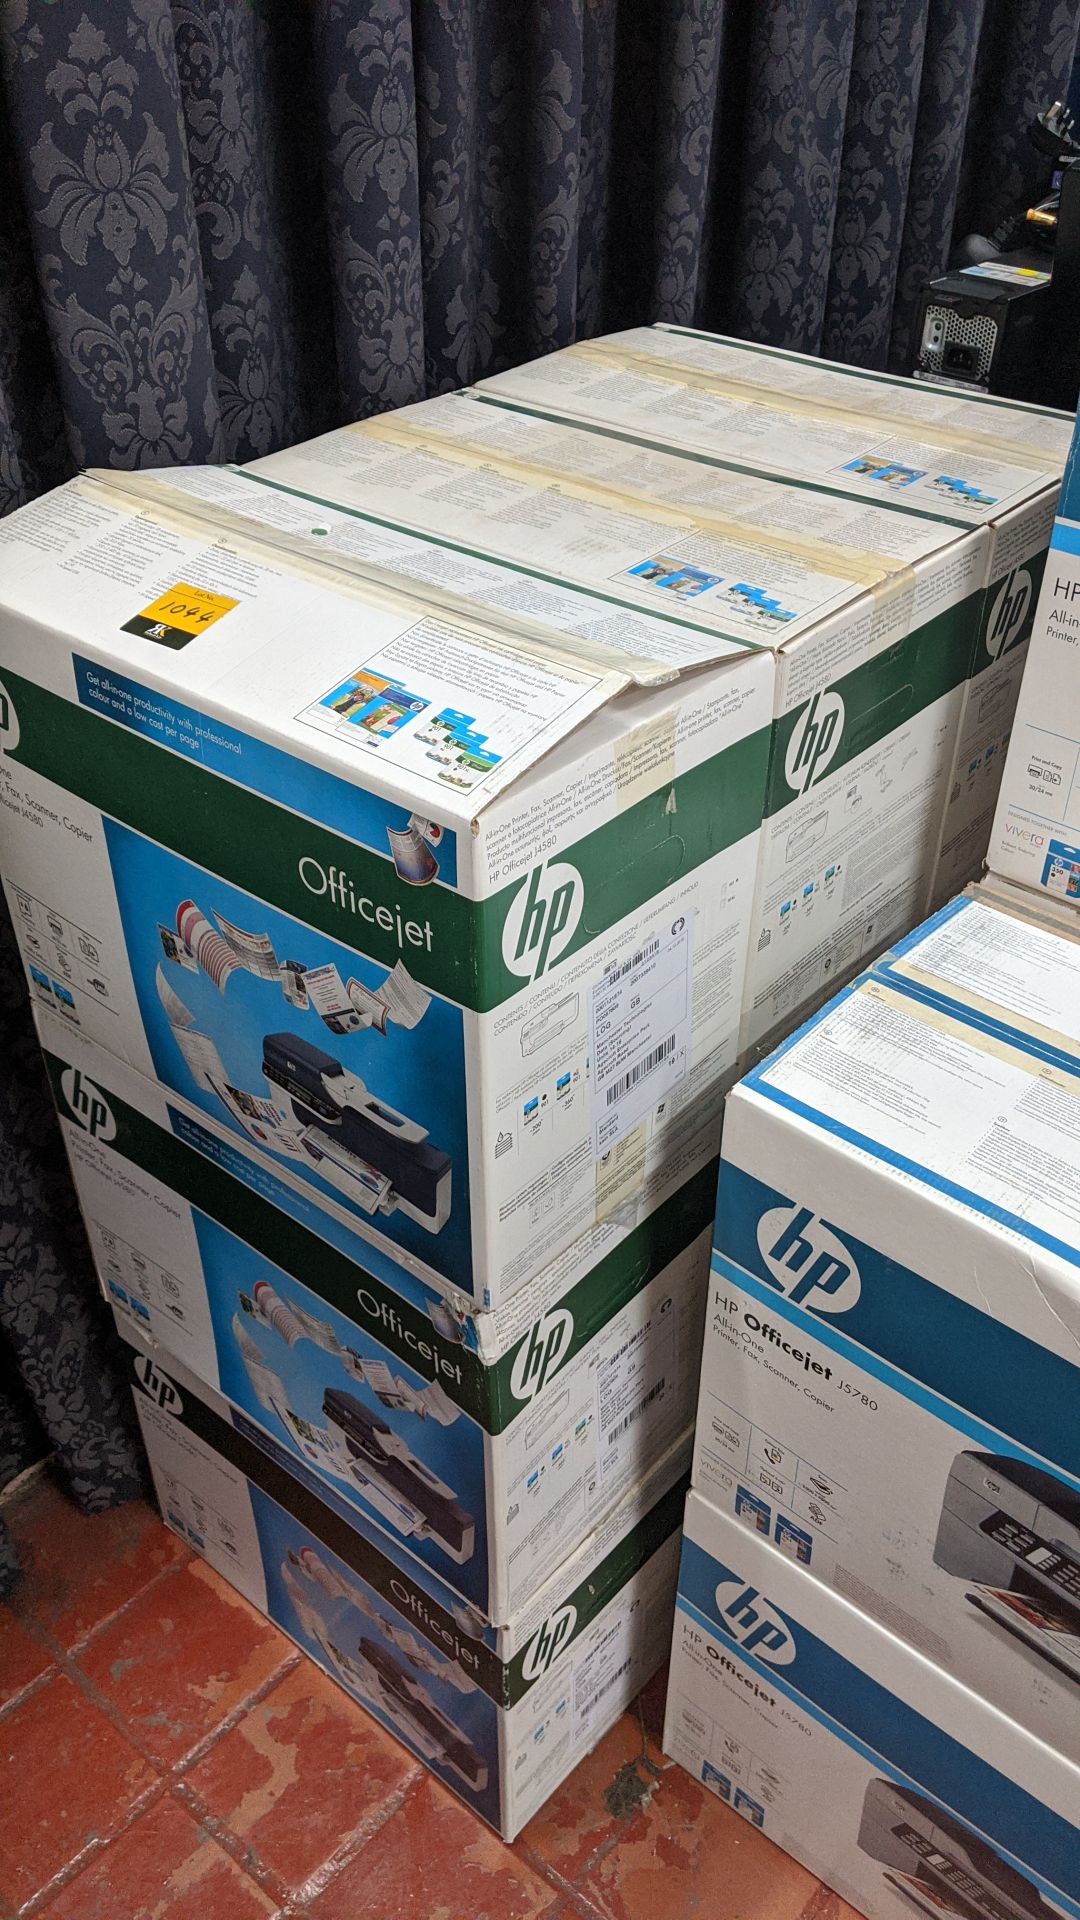 9 off HP OfficeJet J4580 all in one printer fax scanner copiers. This is one of a large number of